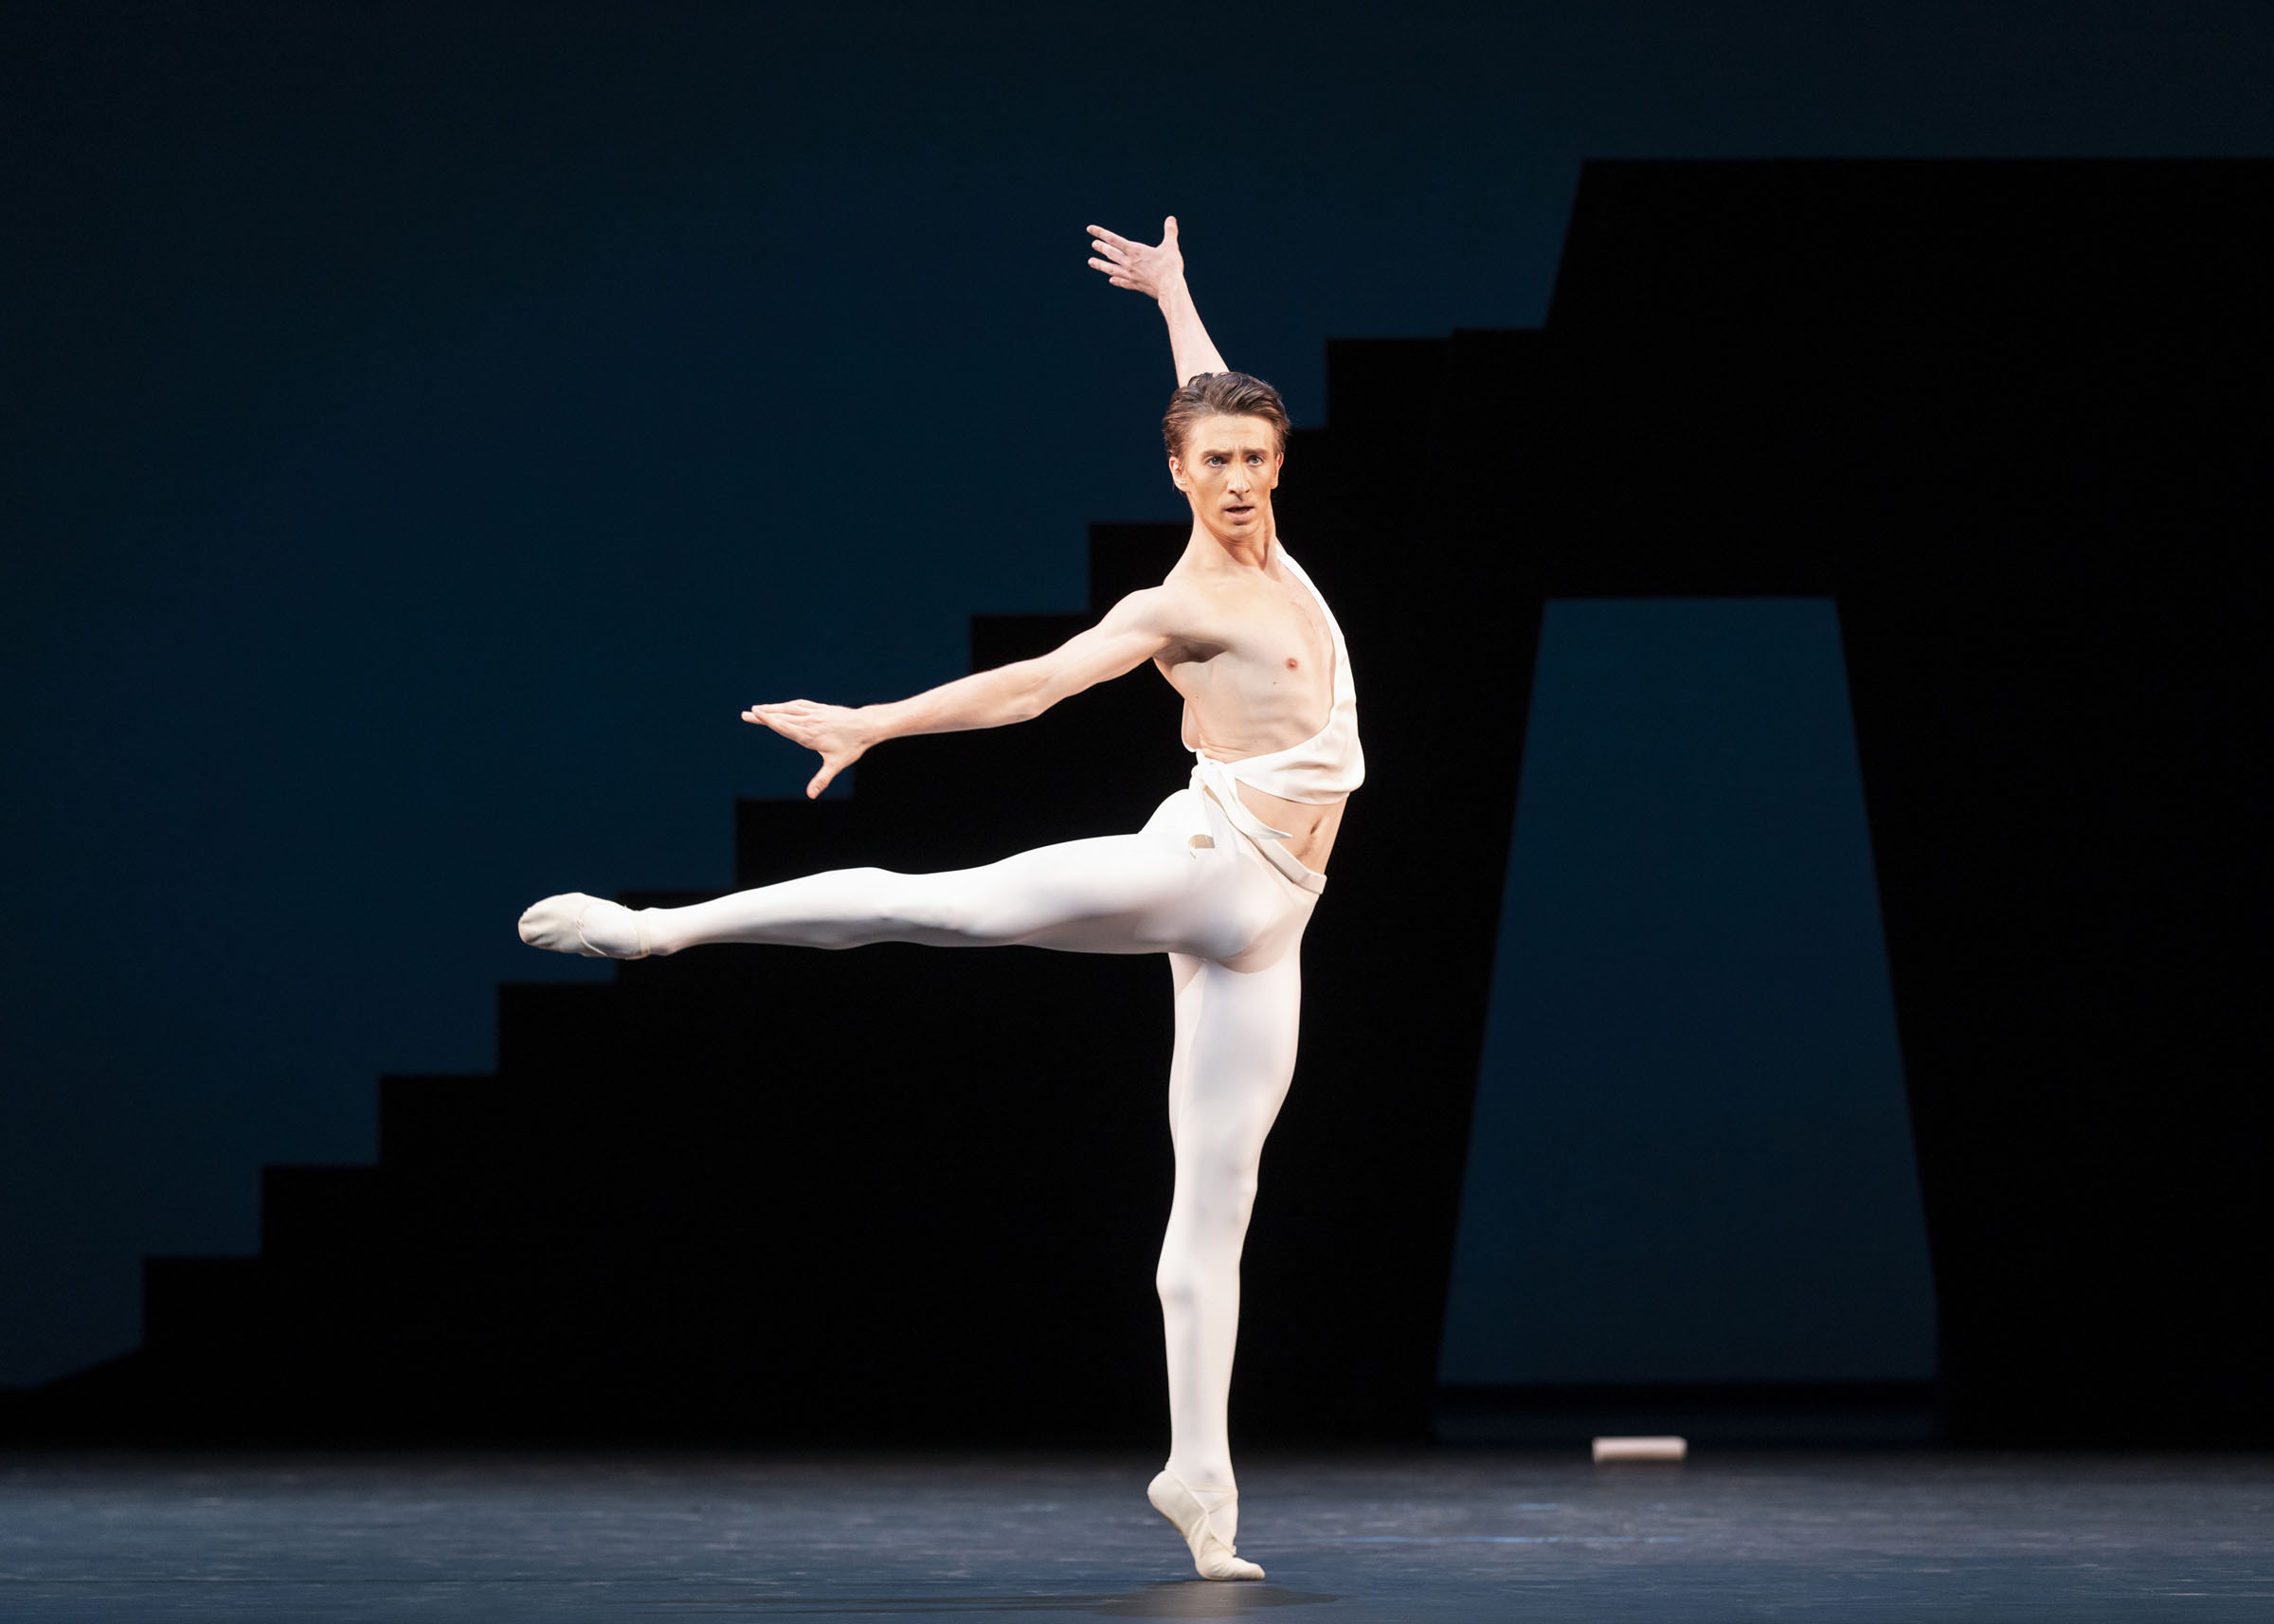 Vadim Muntagirov in Apollo by George Balanchine performed by the Royal Ballet